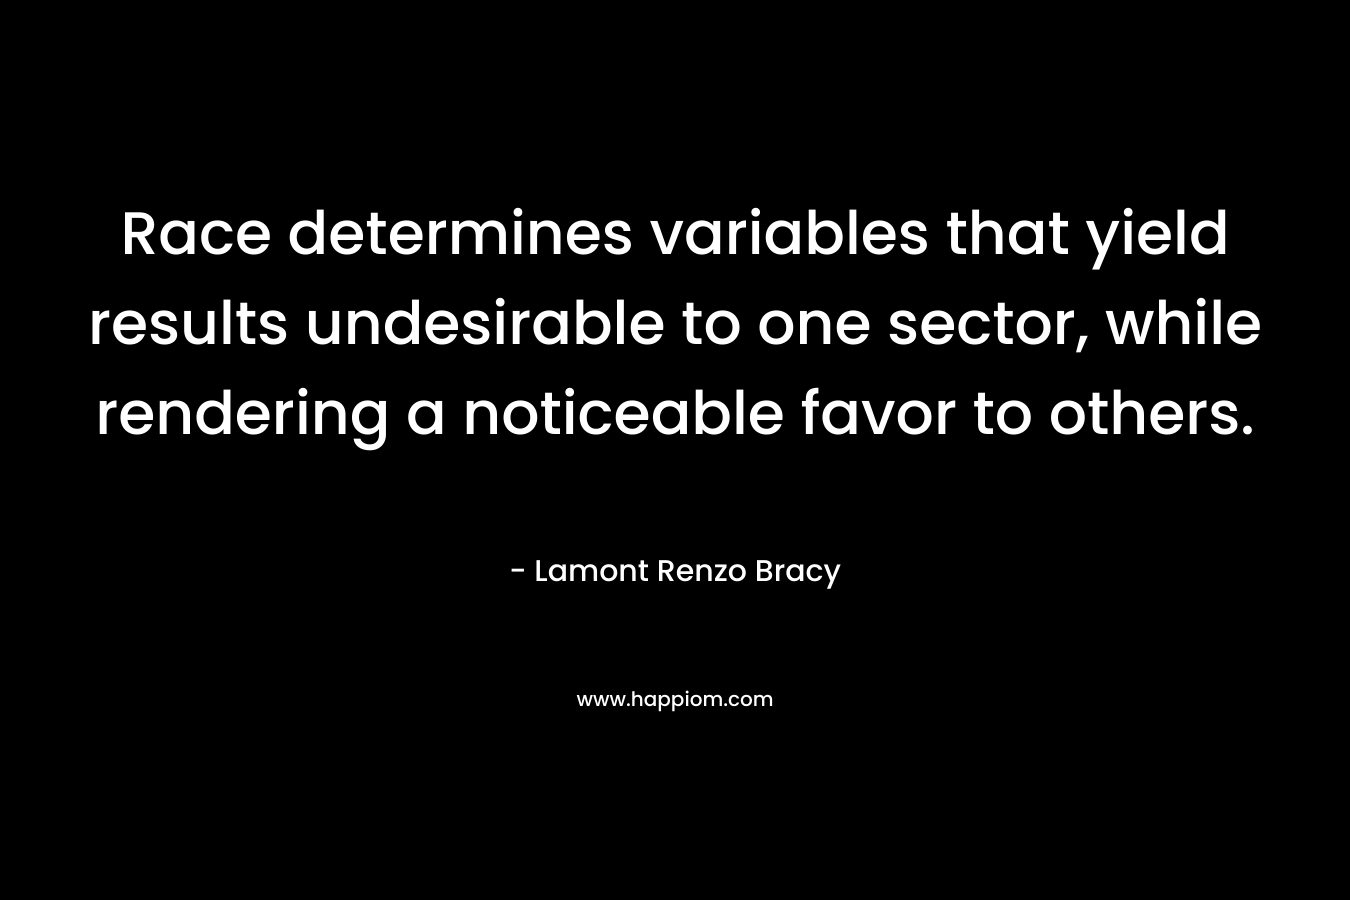 Race determines variables that yield results undesirable to one sector, while rendering a noticeable favor to others. – Lamont Renzo Bracy